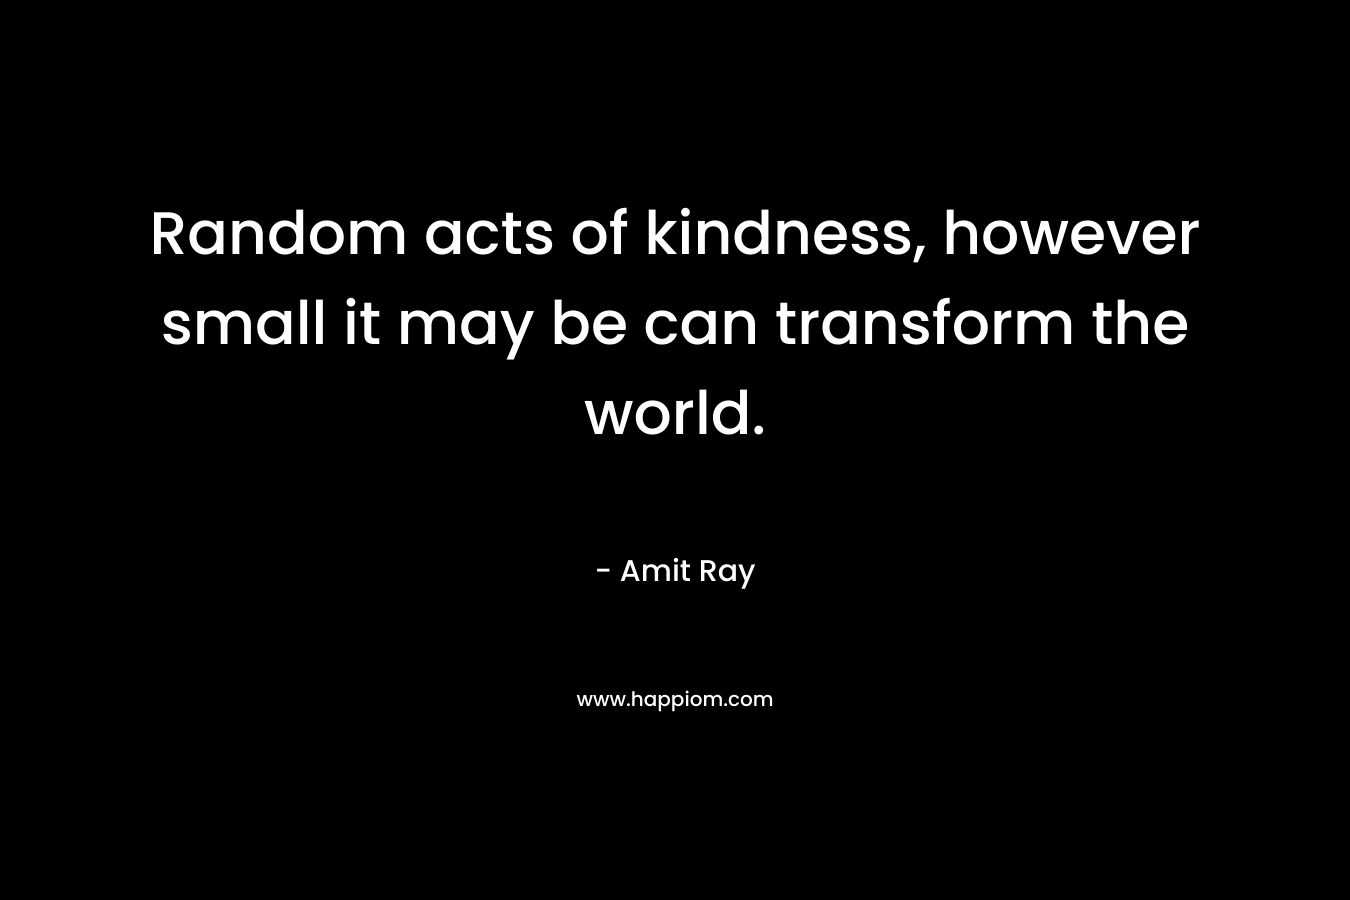 Random acts of kindness, however small it may be can transform the world.